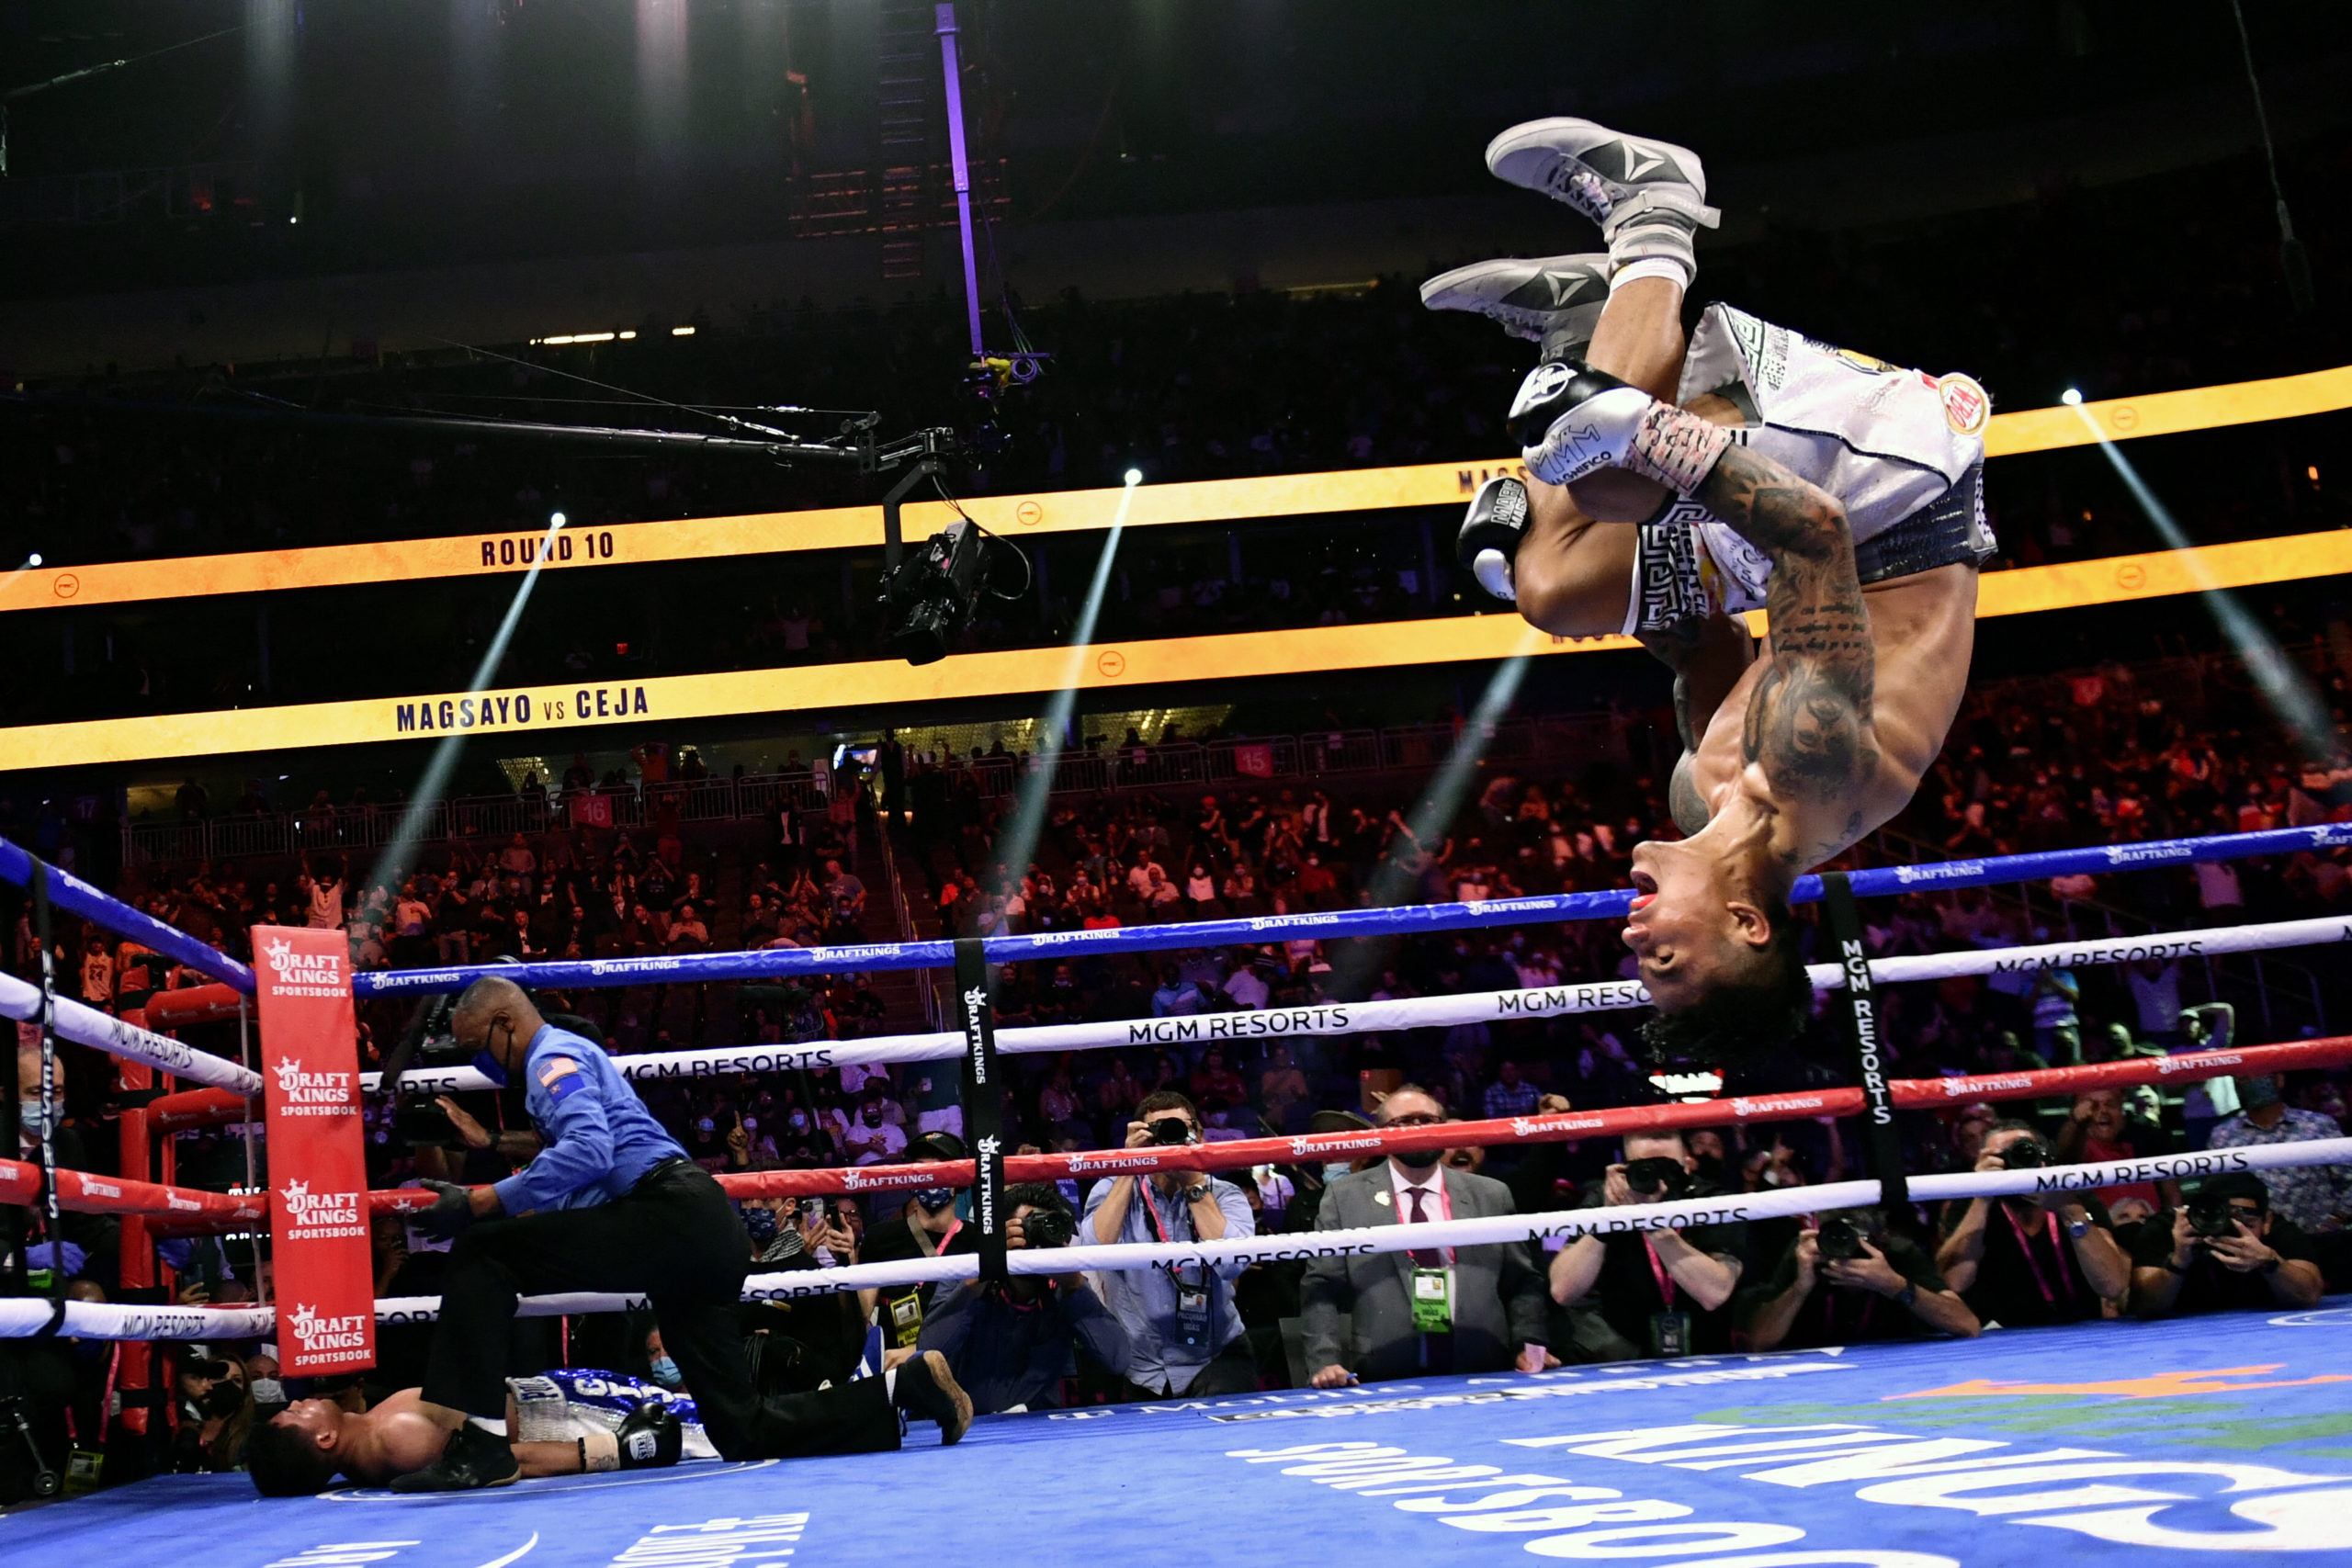 Mark Magsayo (R) of the Philippines backflips as he celebrates after knocking down Julio Ceja (L) of Mexico during the WBA Featherweight Title Eliminator boxing match at T-Mobile Arena in Las Vegas, Nevada on August 21, 2021.